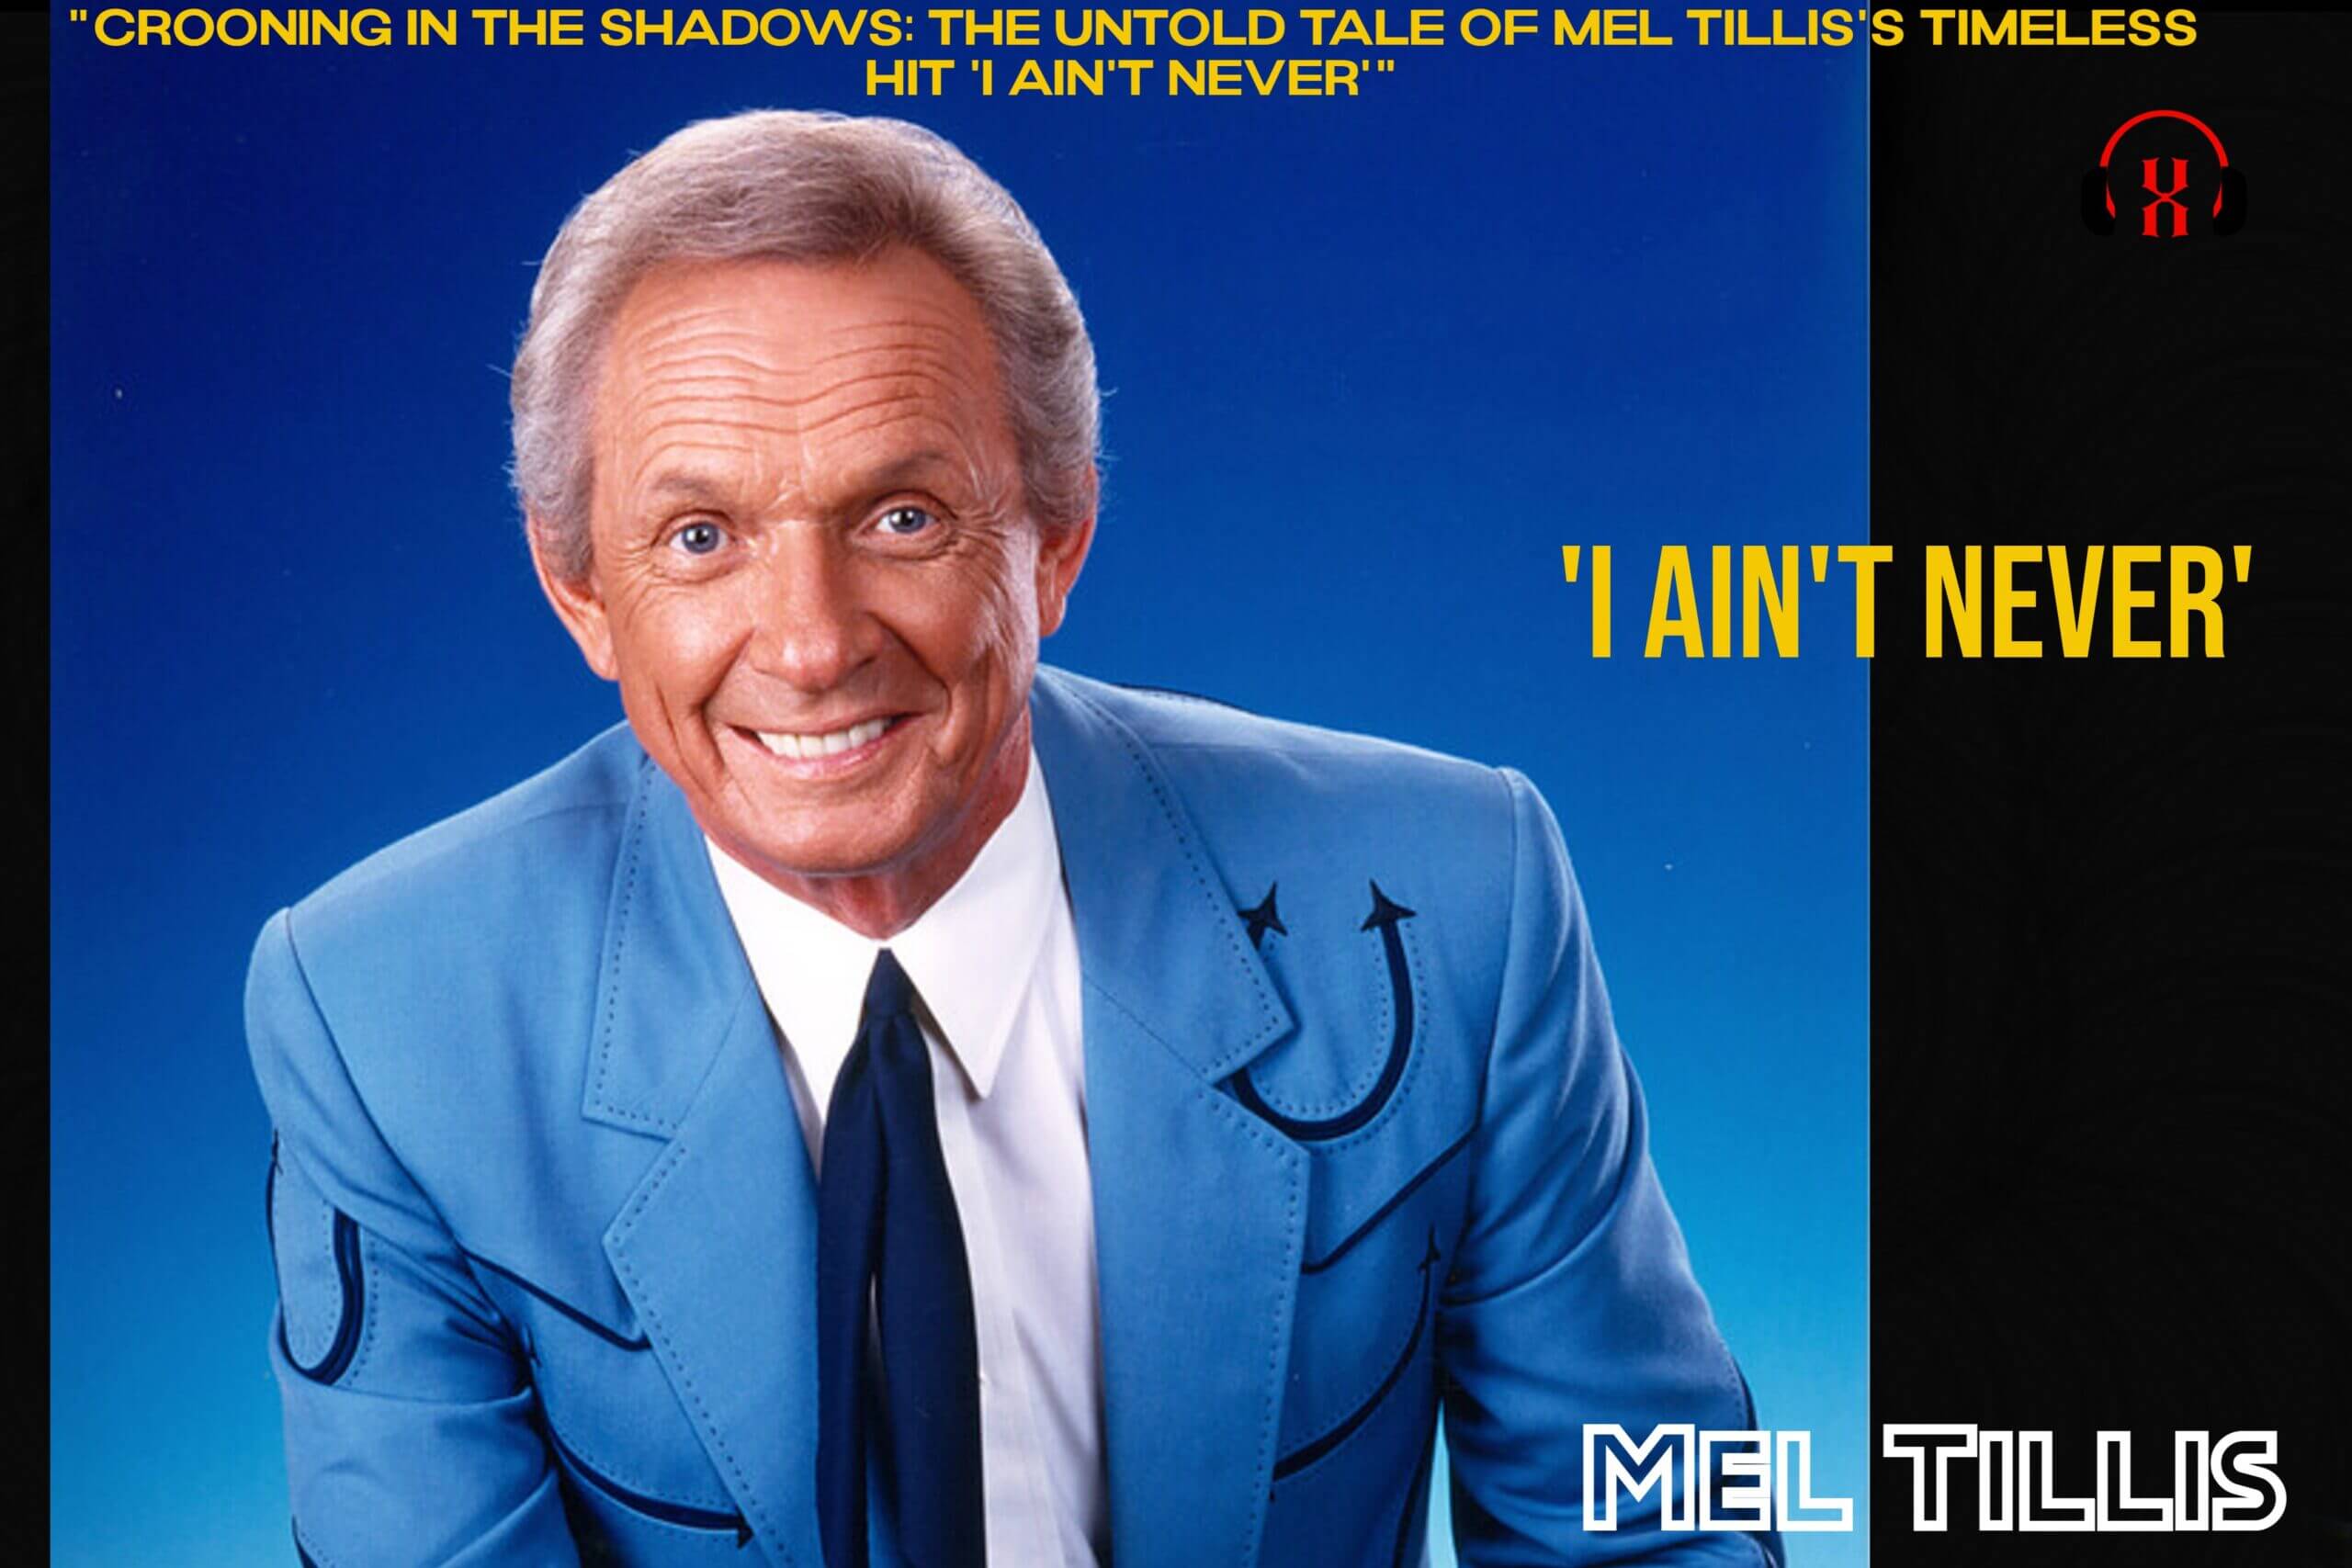 “Crooning in the Shadows: The Untold Tale of Mel Tillis’s Timeless Hit ‘I Ain’t Never'”